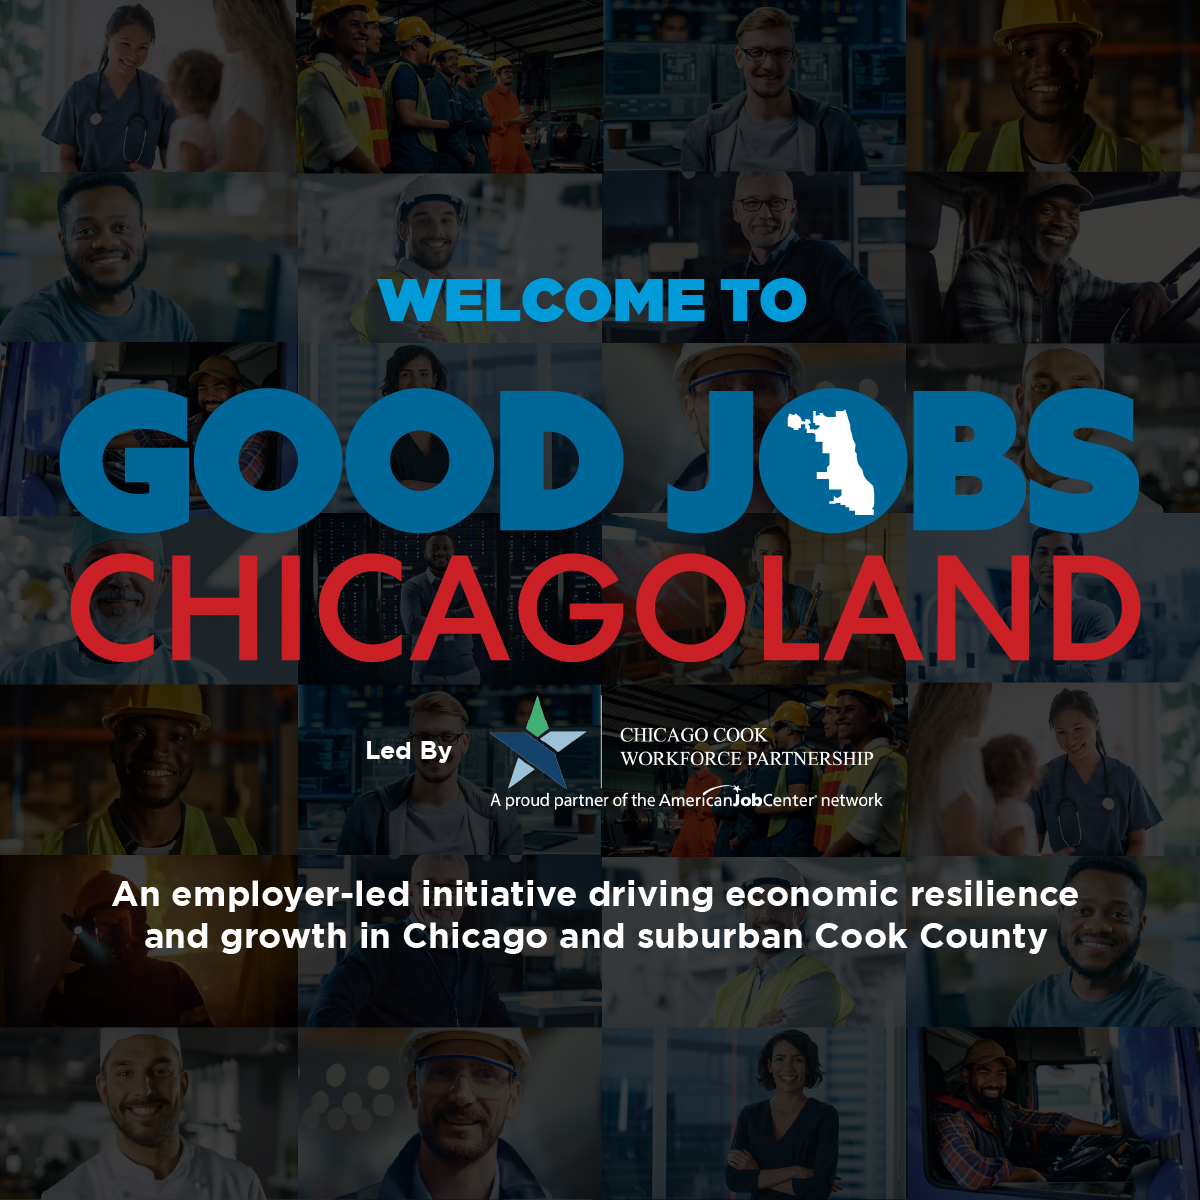 Dark graphic with blue and red text. "Wlecome to Good Jobs Chicagoland. Led By the Chicago Cook Workforce Partnership. An employer-led initiative driving economic resilience and growth in Chicago and suburban Cook County.